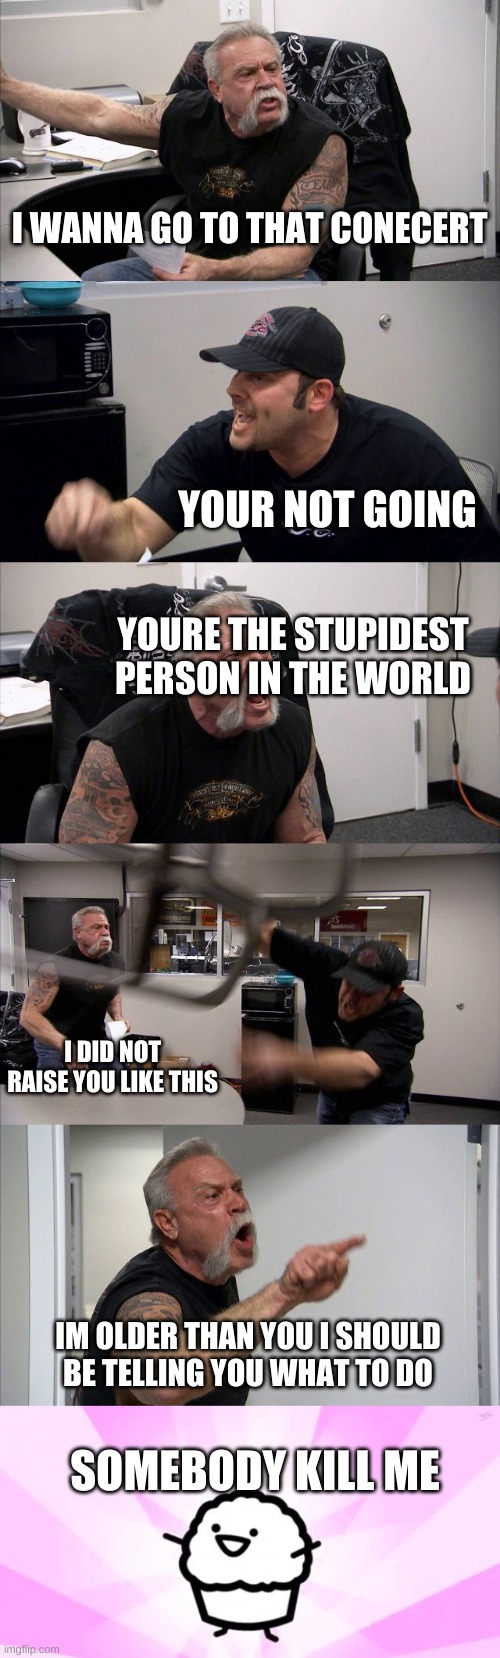 asdf | I WANNA GO TO THAT CONECERT; YOUR NOT GOING; YOURE THE STUPIDEST PERSON IN THE WORLD; I DID NOT RAISE YOU LIKE THIS; IM OLDER THAN YOU I SHOULD BE TELLING YOU WHAT TO DO; SOMEBODY KILL ME | image tagged in memes,american chopper argument,somebody kill me asdf | made w/ Imgflip meme maker